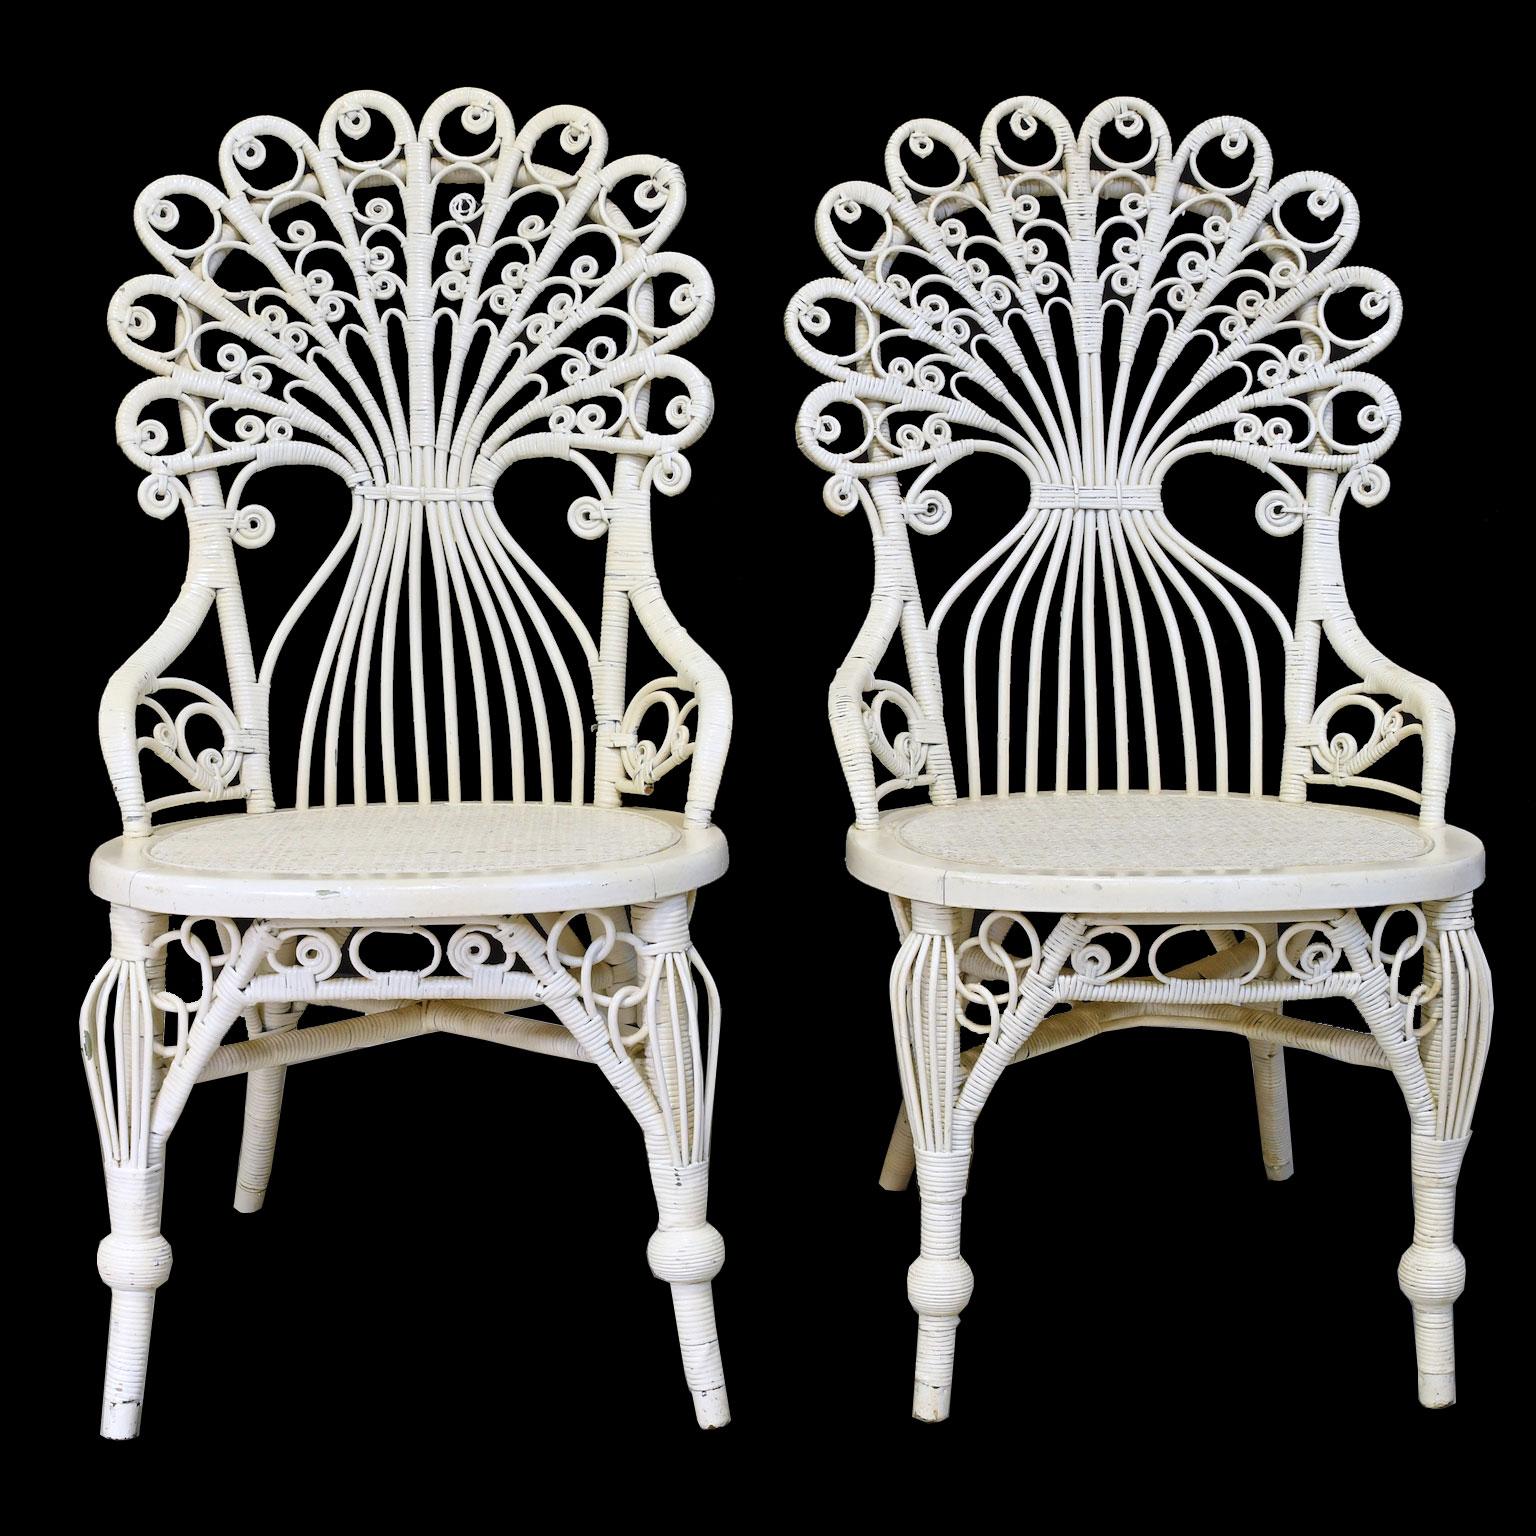 A lovely pair of American Victorian chairs in hand-woven wicker with peacock back and bird-cage legs, possibly Heywood Wakefield, circa 1880.
Measures: 19 1/2